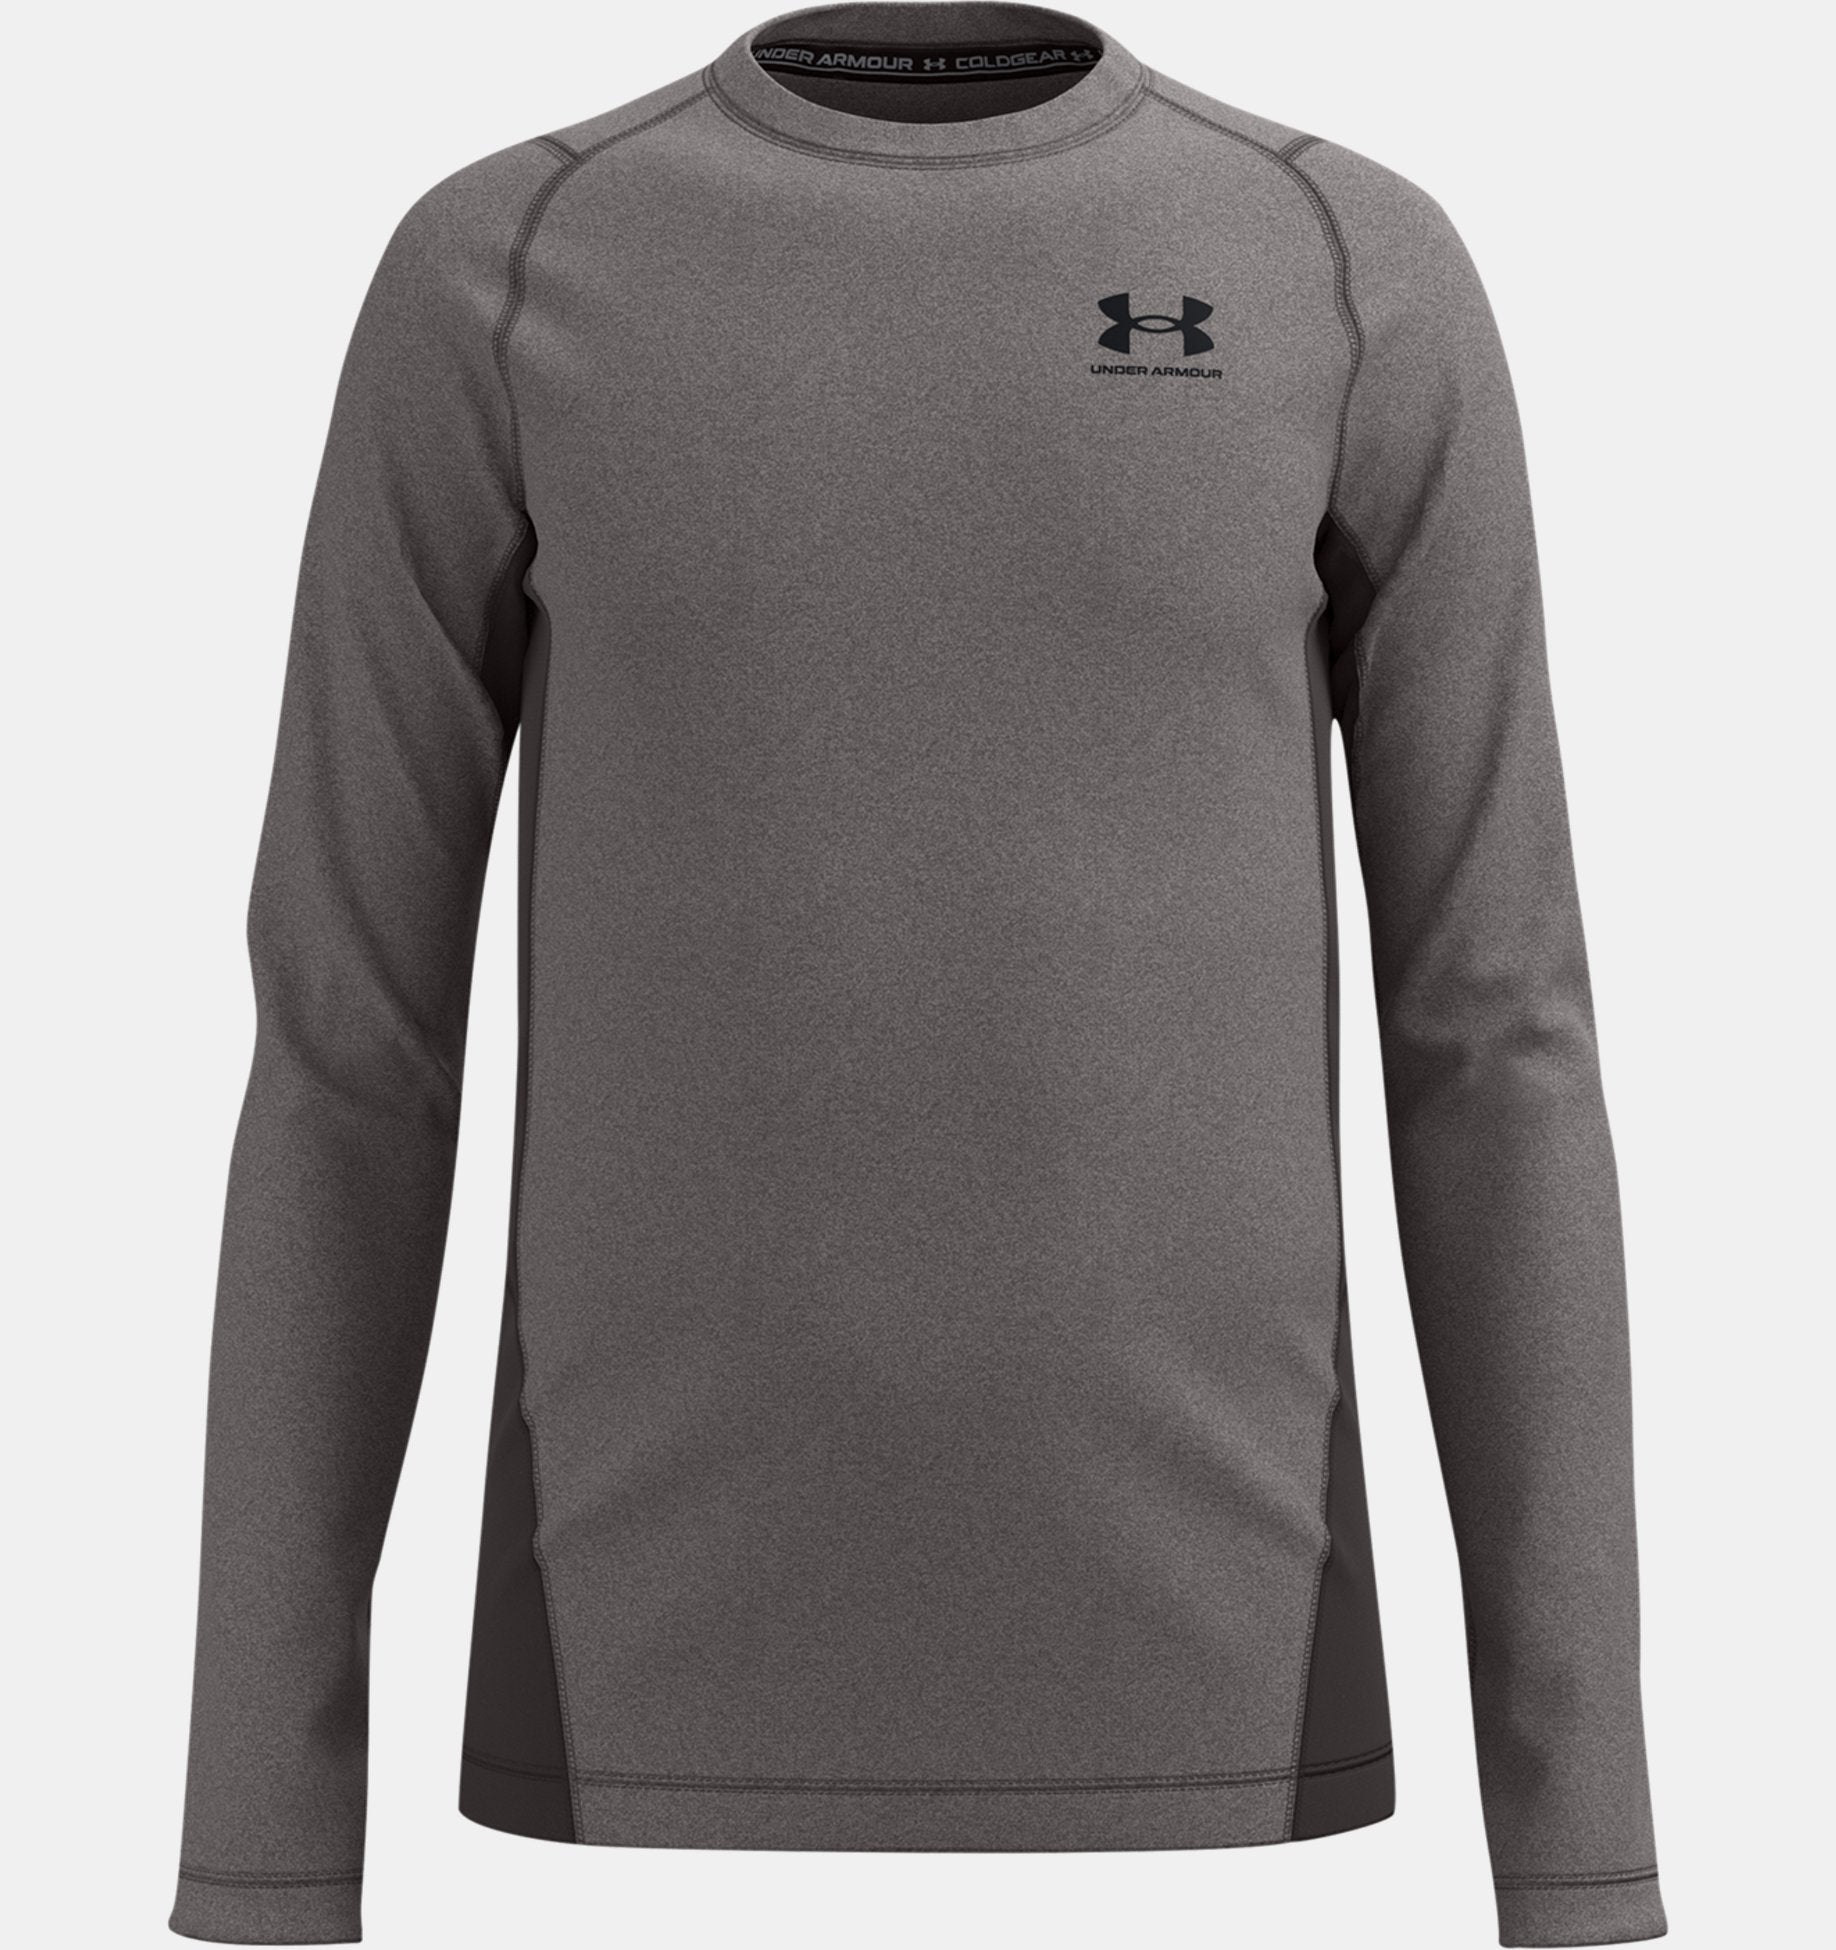 Under Armour long sleeve tshirt, size XL in great used condition!勇  Grey long  sleeve shirt, Womens long sleeve shirts, Under armour shirts